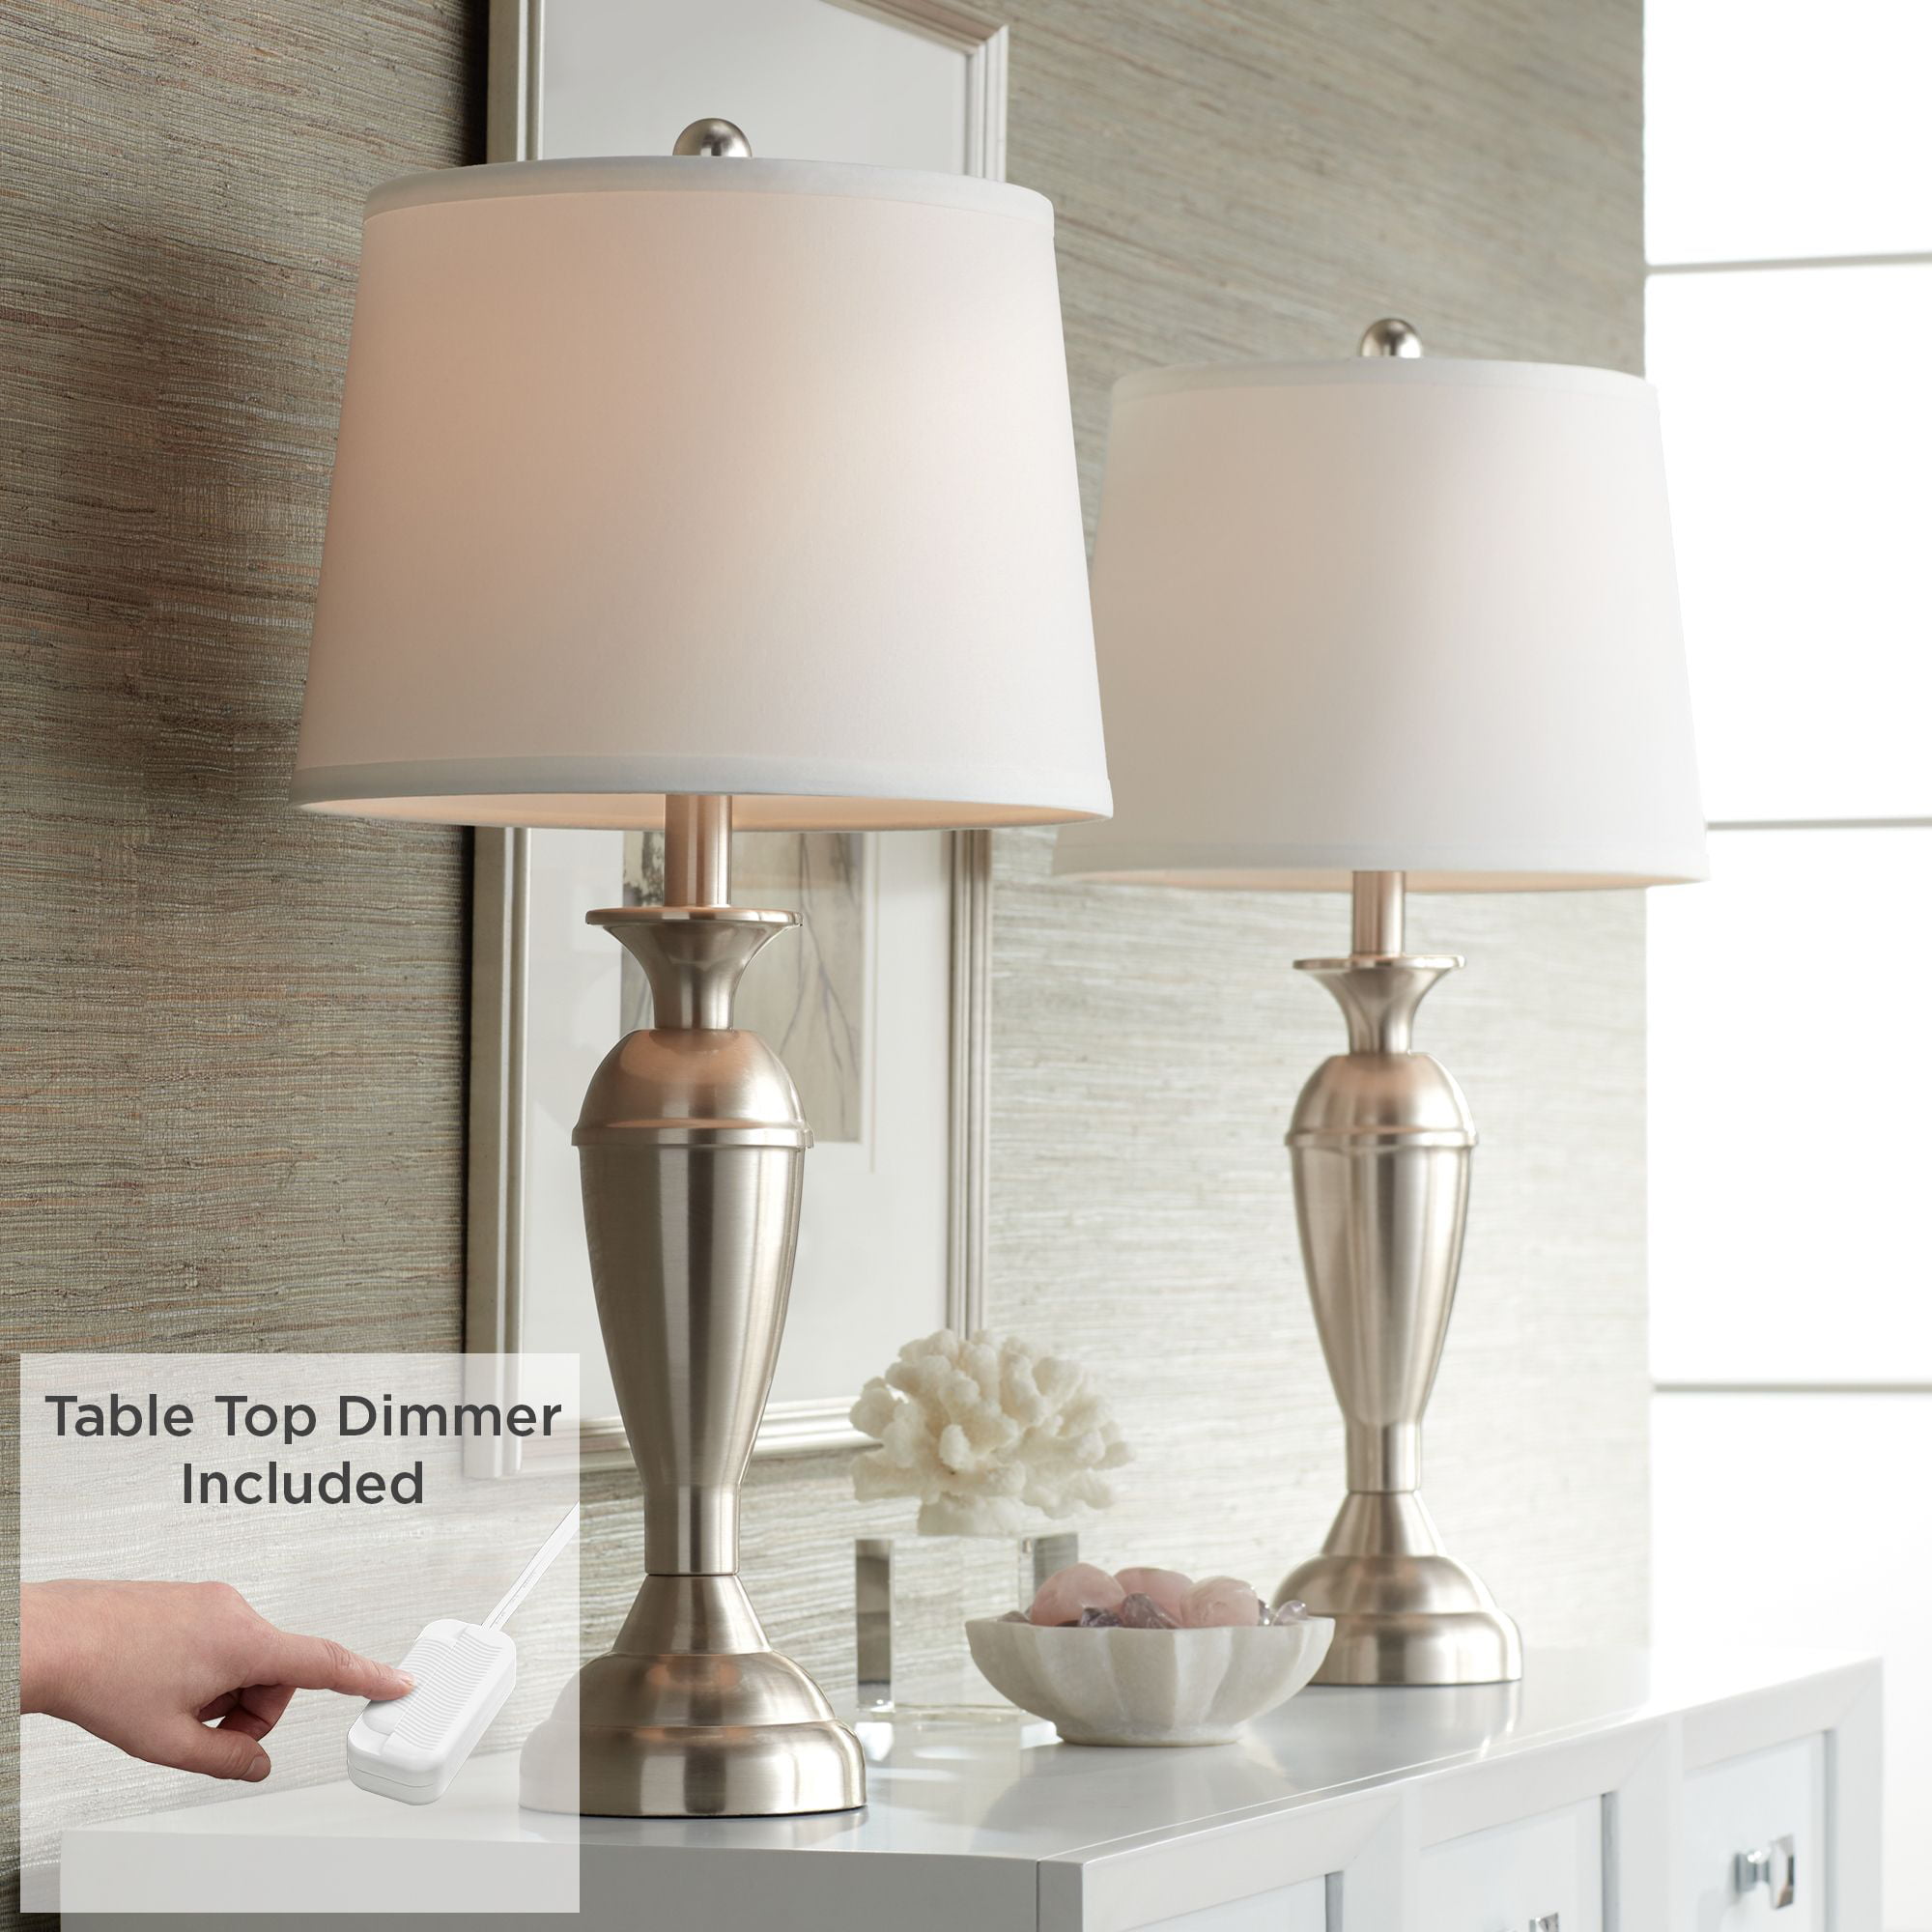 Table Top Dimmers Brushed Nickel White, End Table Lamps Set Of 2